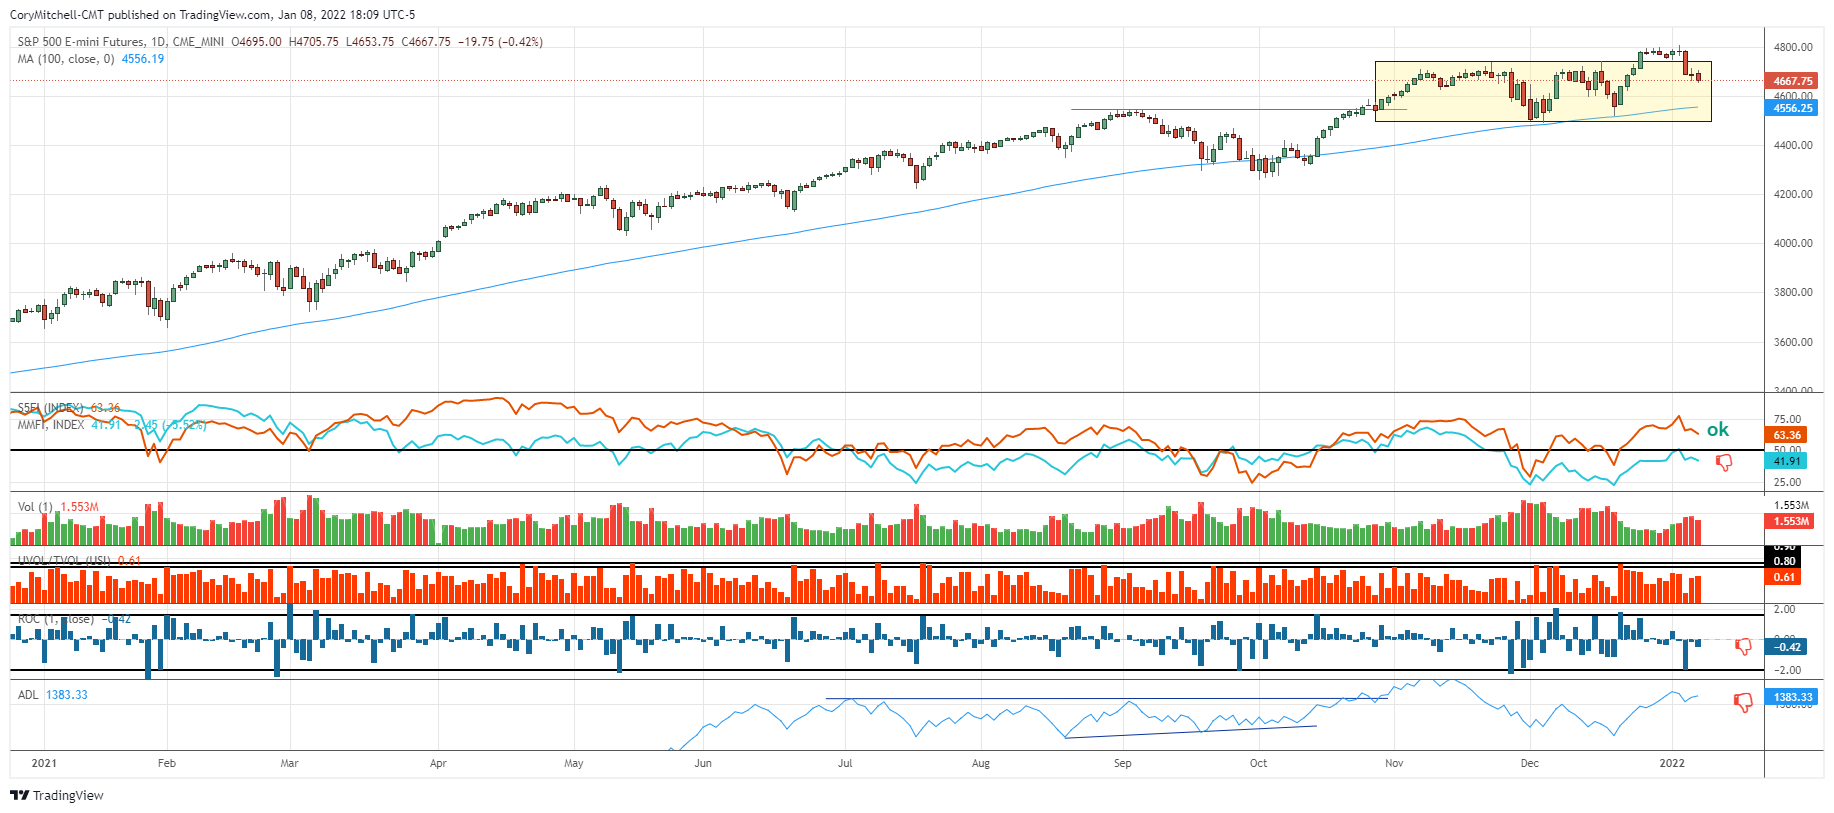 S&P 500 with market health indicators as of Jan 8 2022